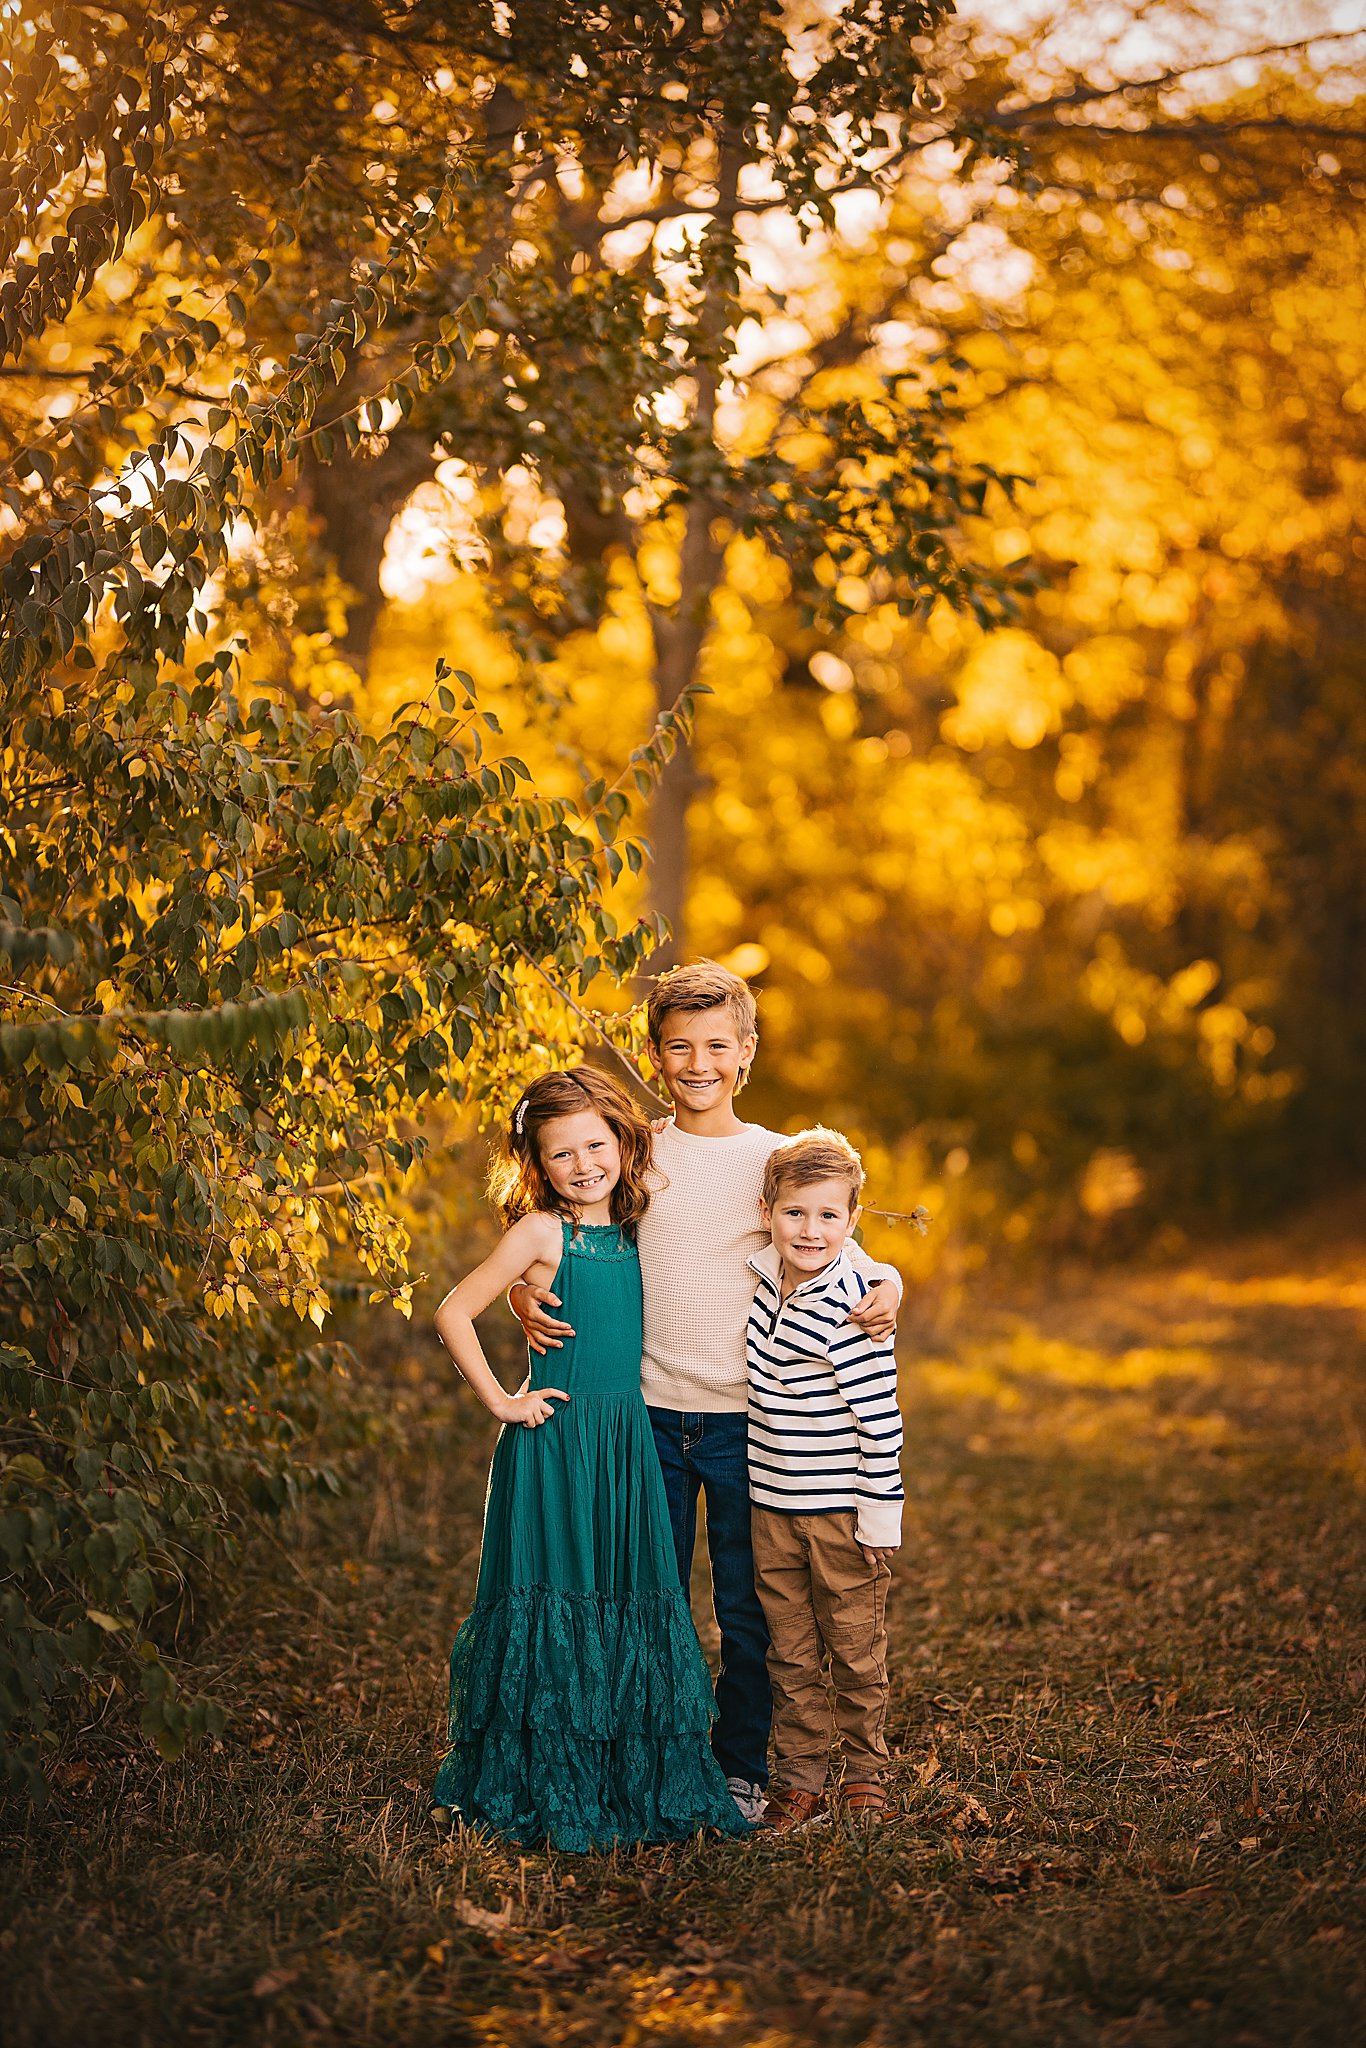 siblings hug together for a sweet photo at their family photo session